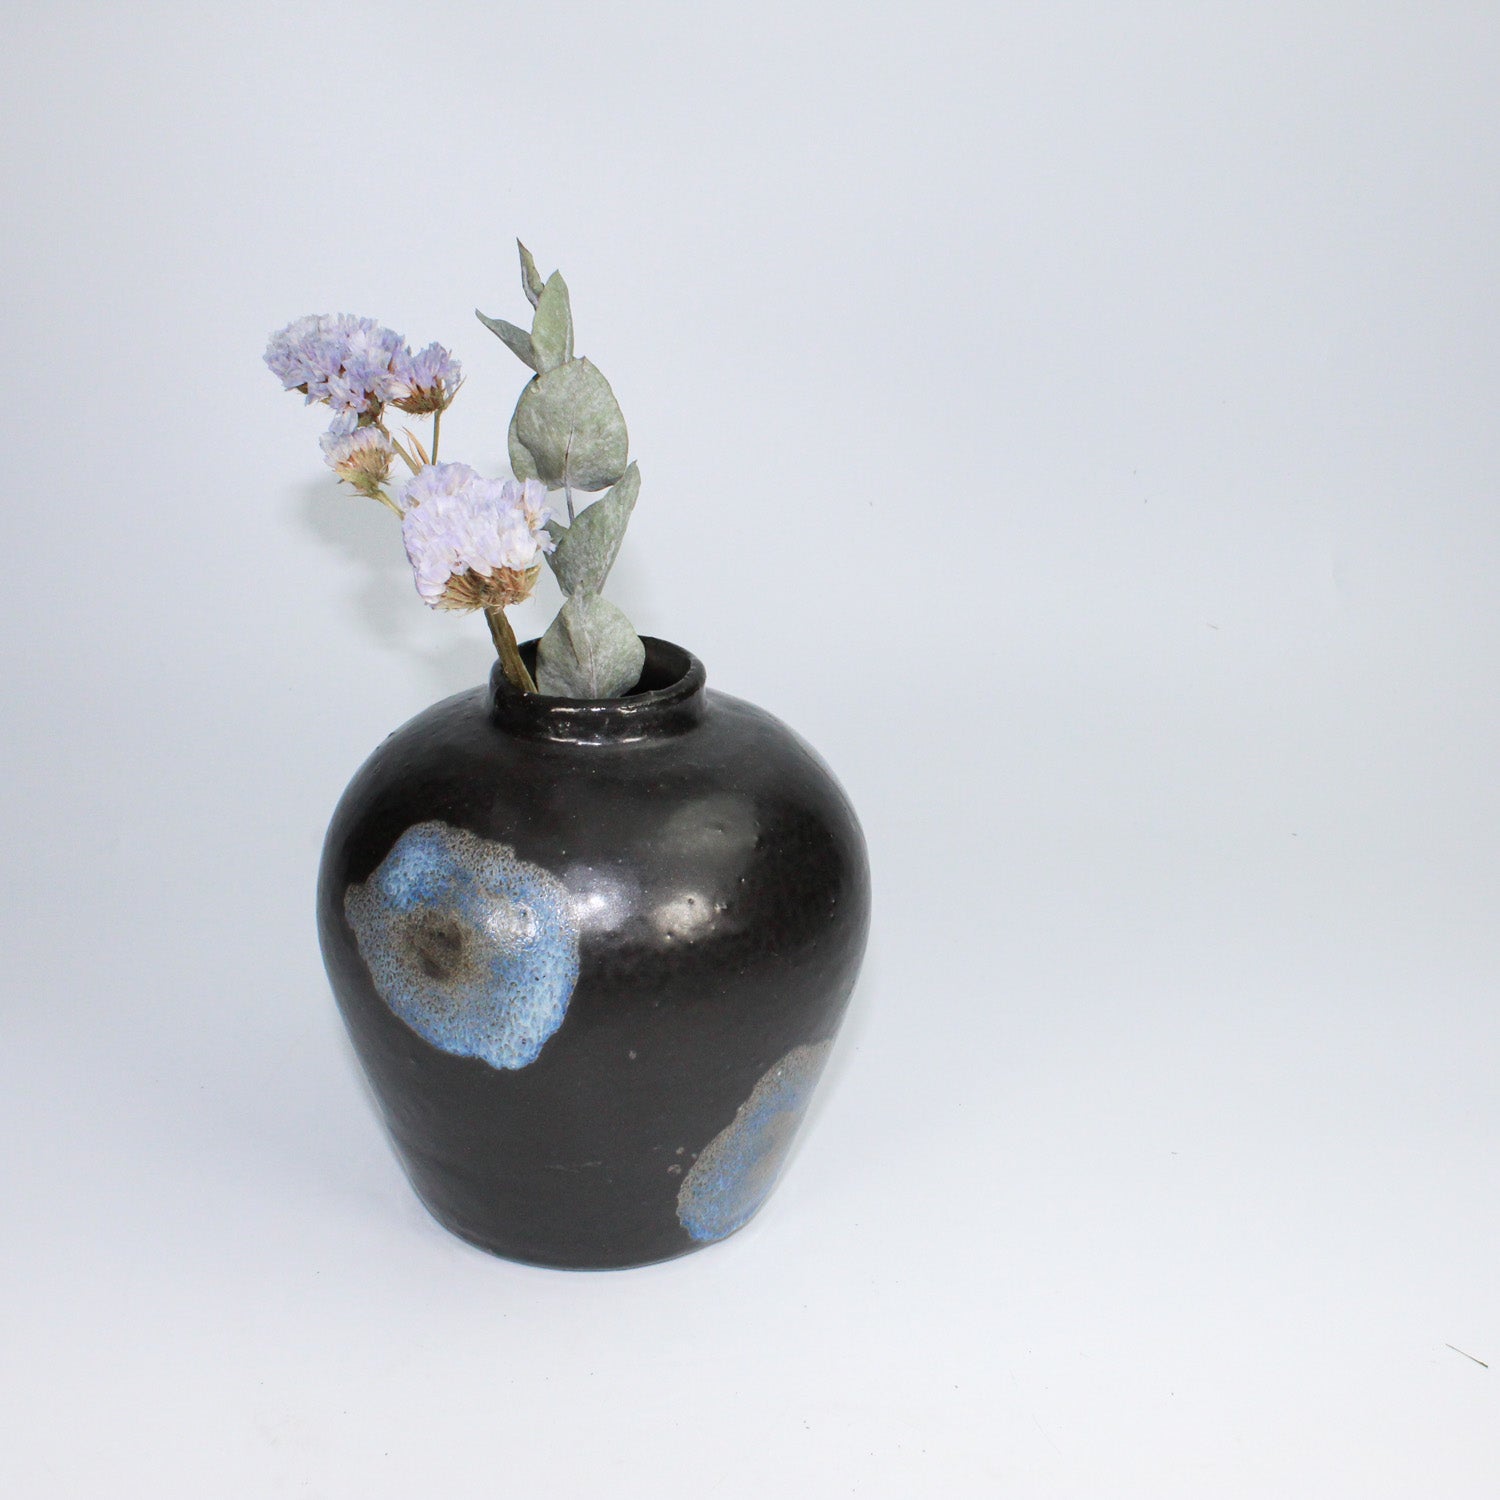 Small black ceramic vase with blue detailing and dried flowers,